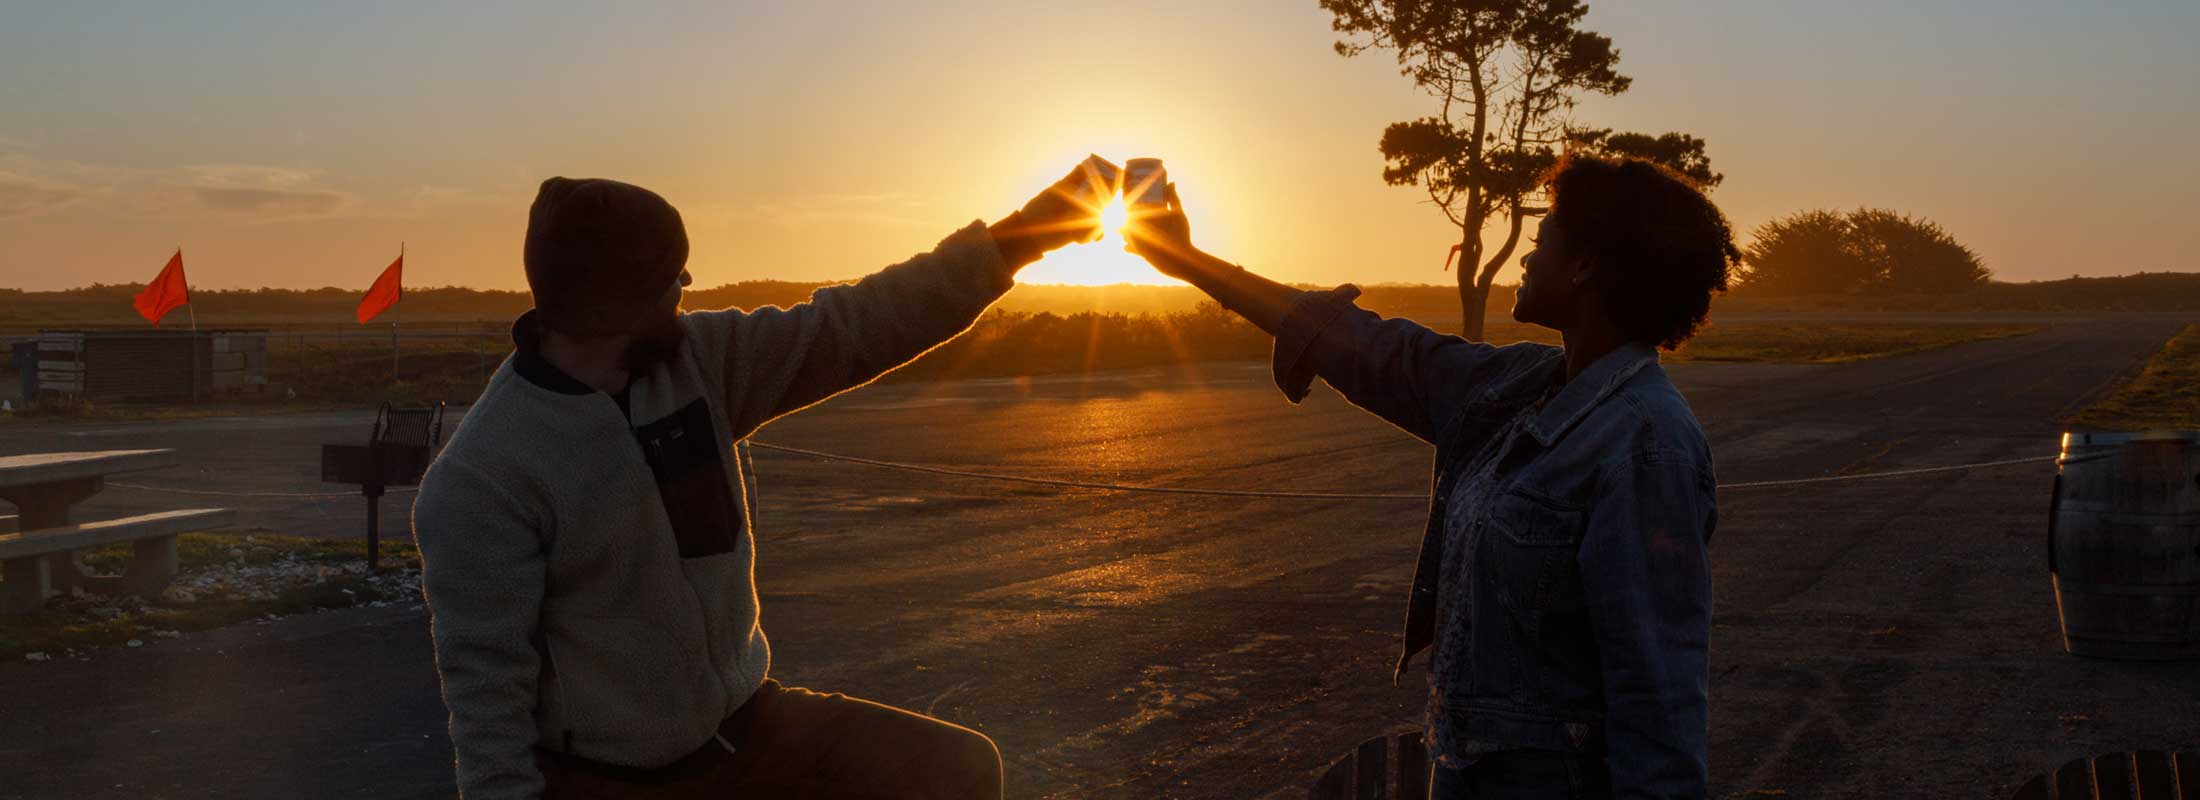 Two people join hands to form a heart around the light of the setting sun